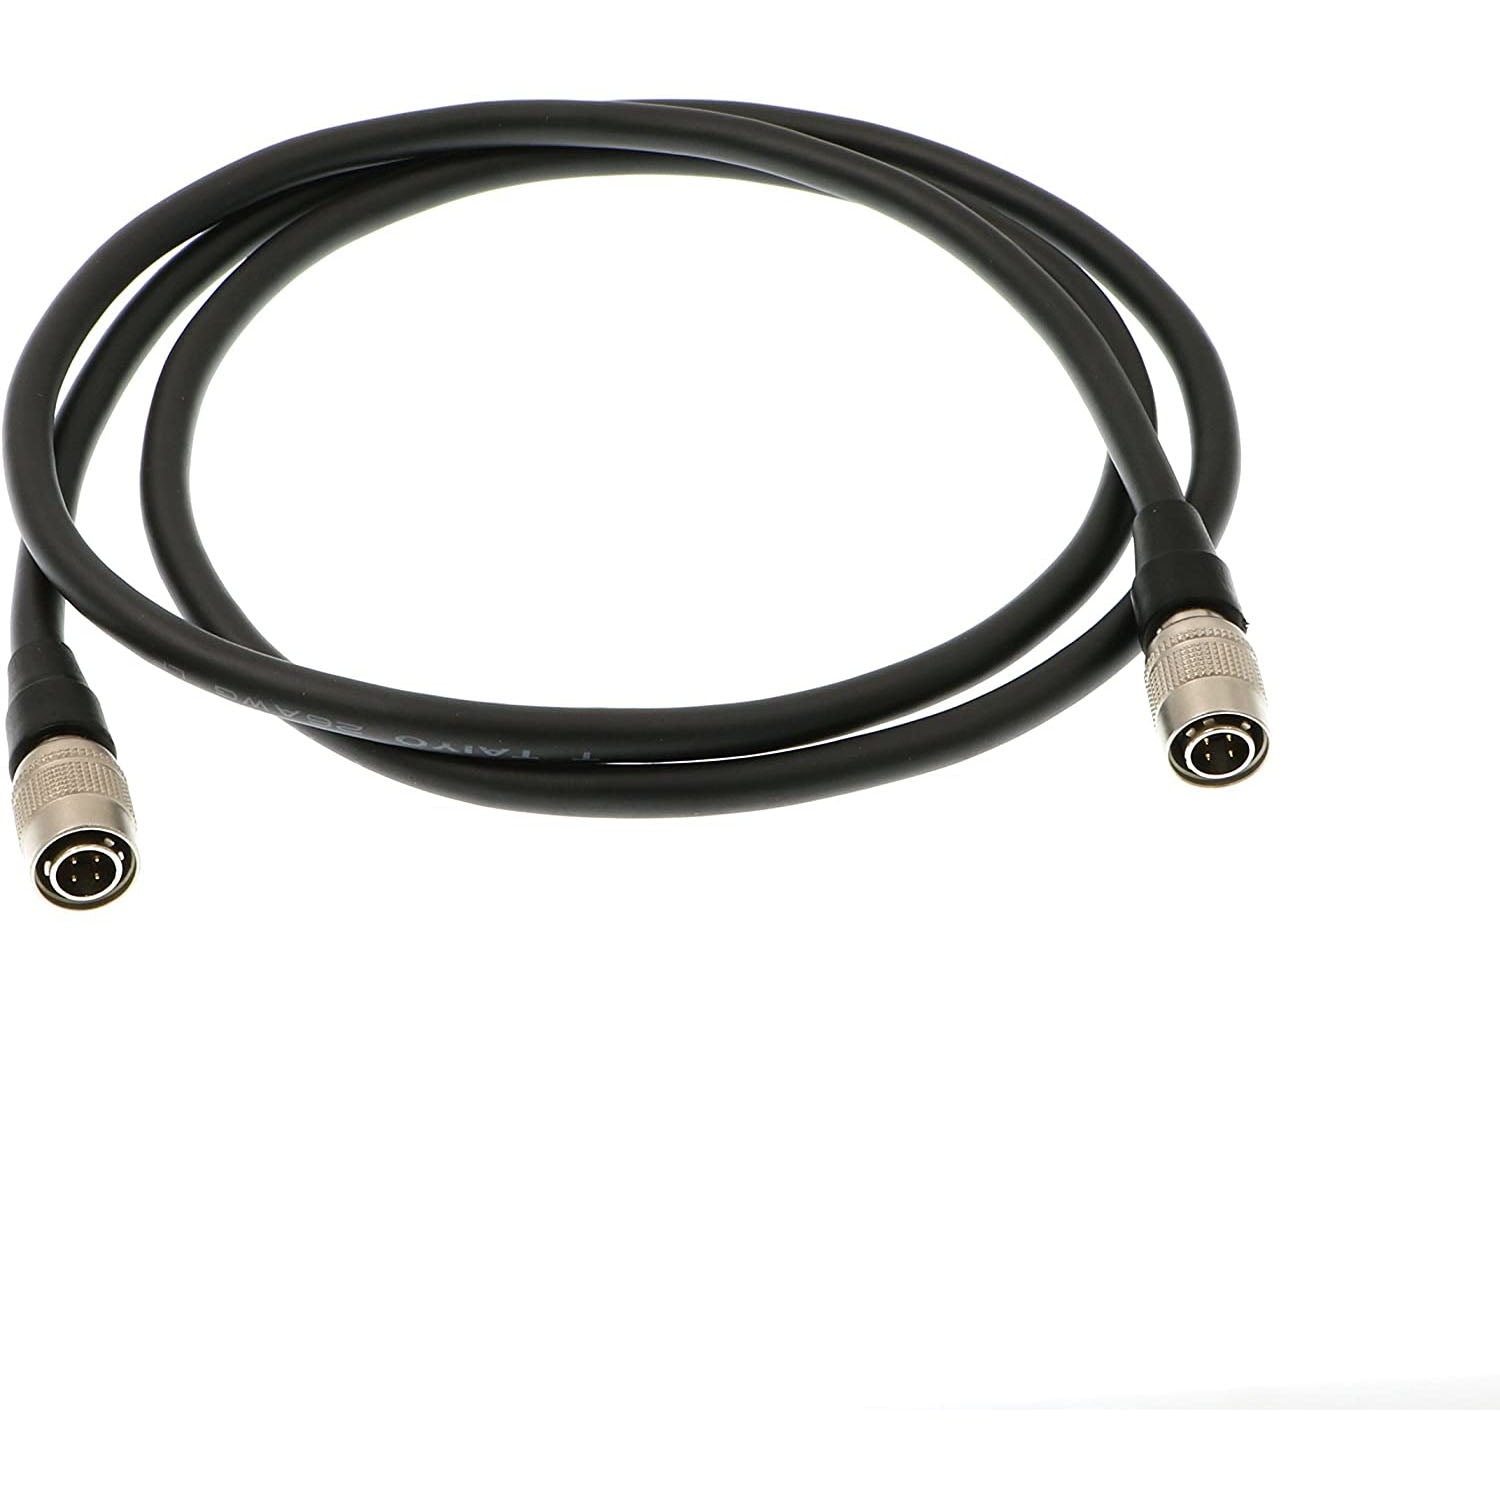 4 Pin Male Hirose To Boost 12V USB Power Cable For Sound Devices